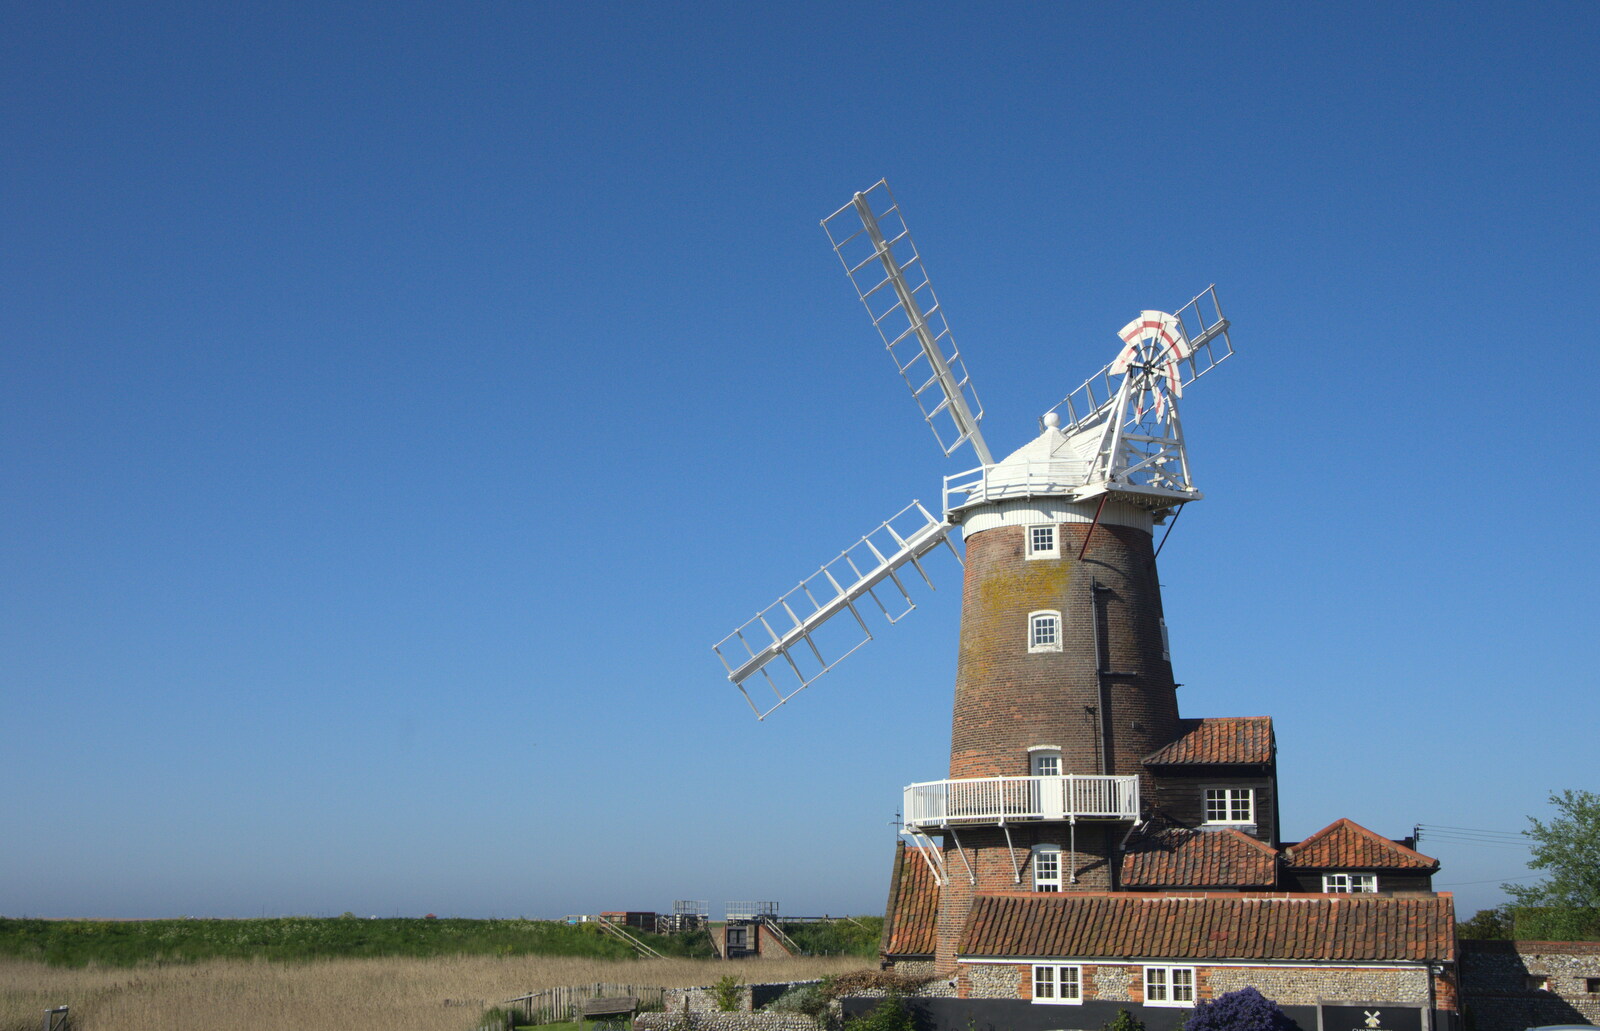 The Cley windmill from The BSCC at Needham, and a Birthday By The Sea, Cley, Norfolk - 26th May 2012